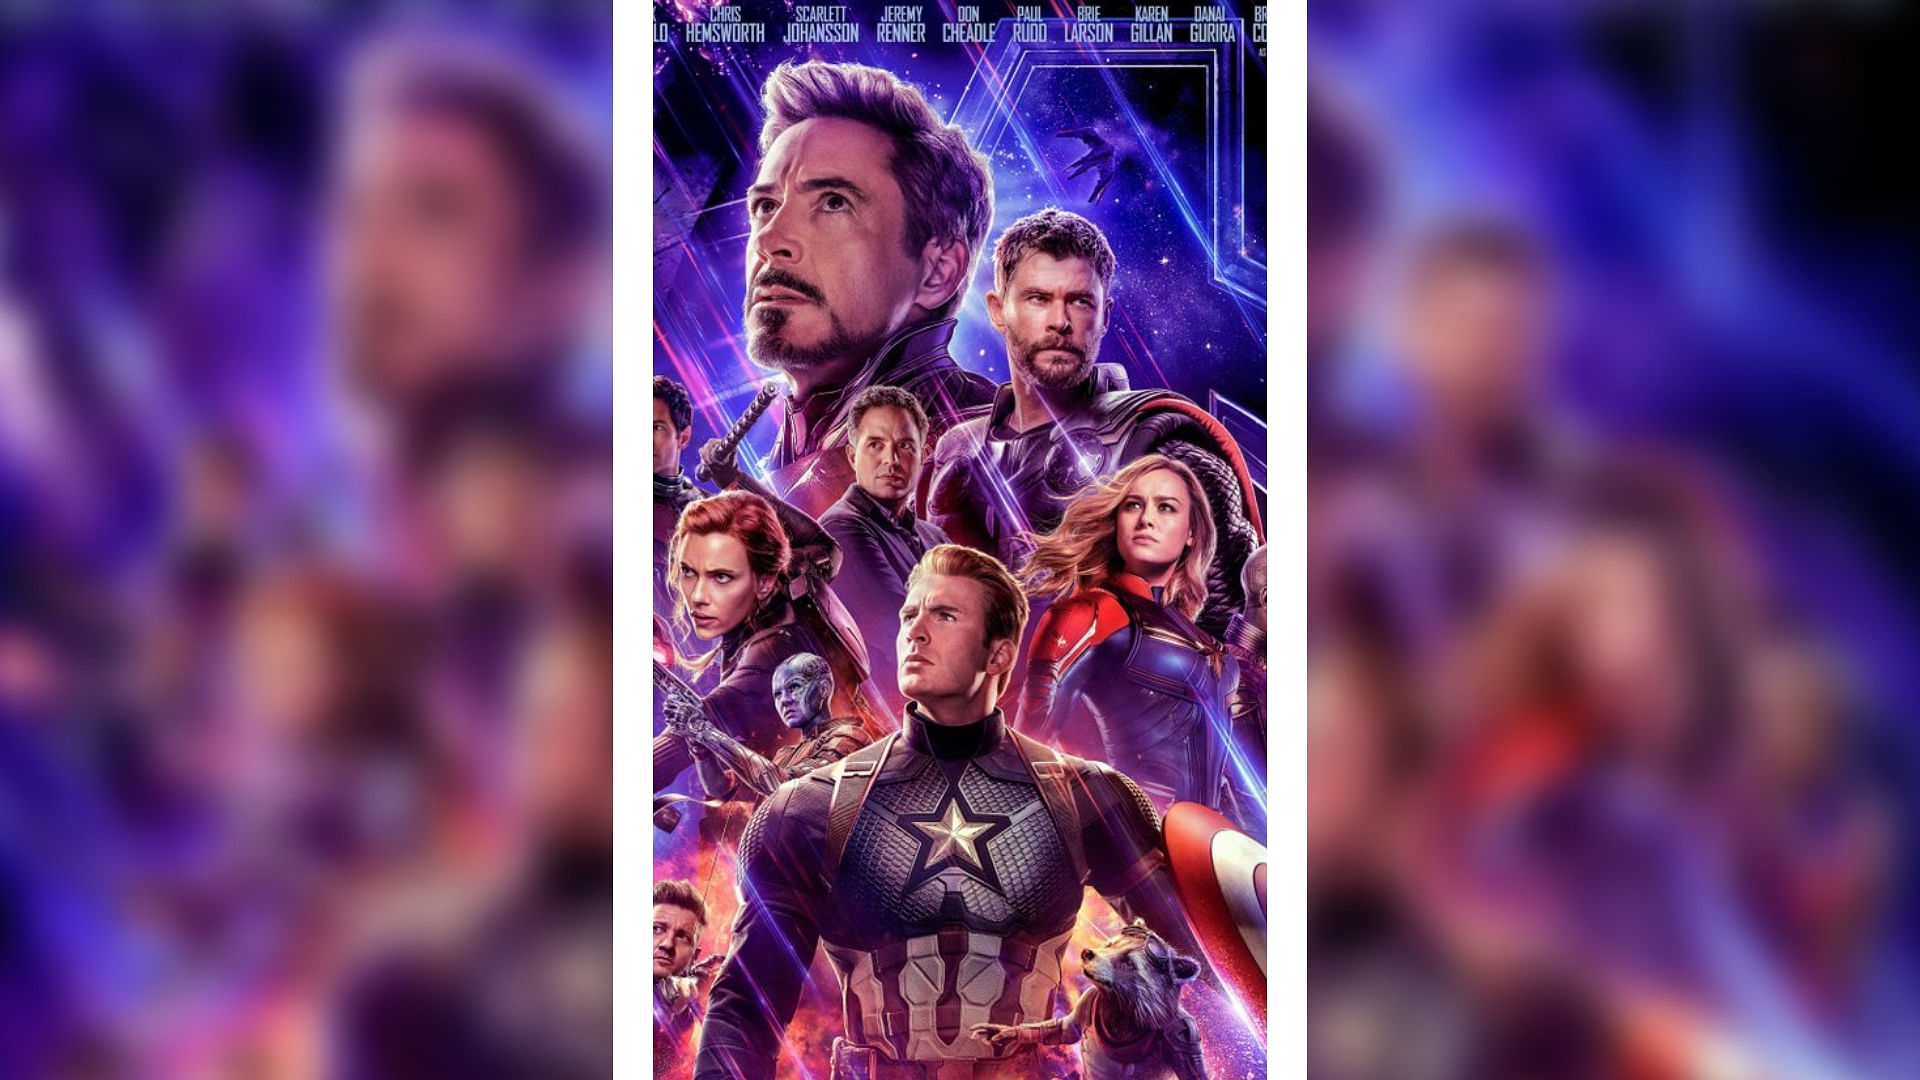 <i>Avengers: Endgame </i>has earned over Rs 200 crore at the Indian box office in its first week.